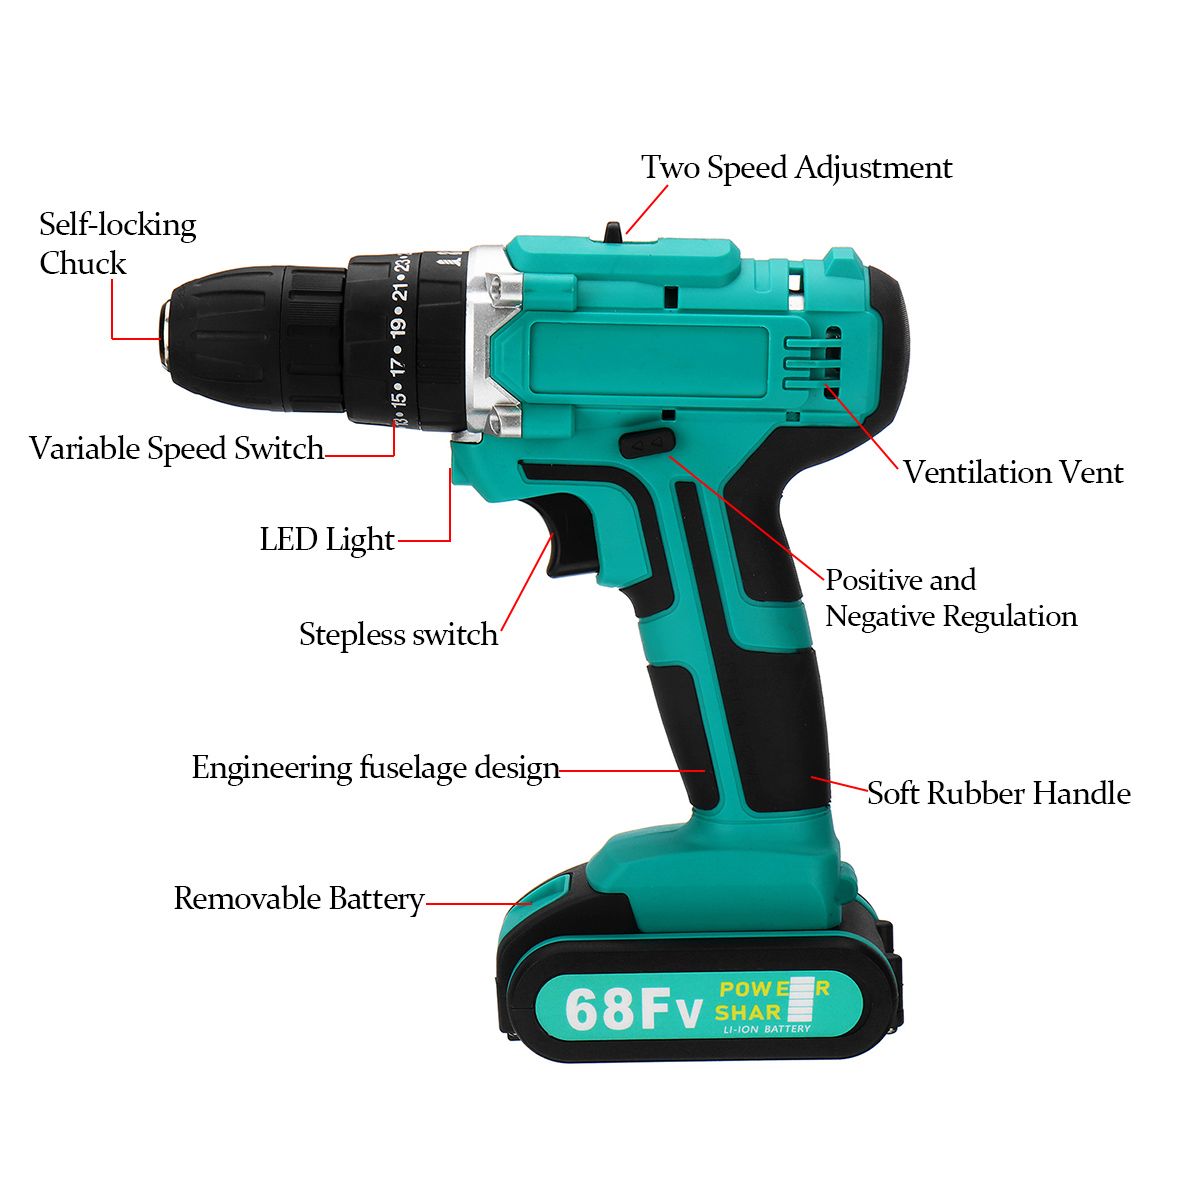 68FV-Household-Lithium-Electric-Screwdriver-2-Speed-Impact-Power-Drills-Rechargeable-Drill-Driver-W--1559731